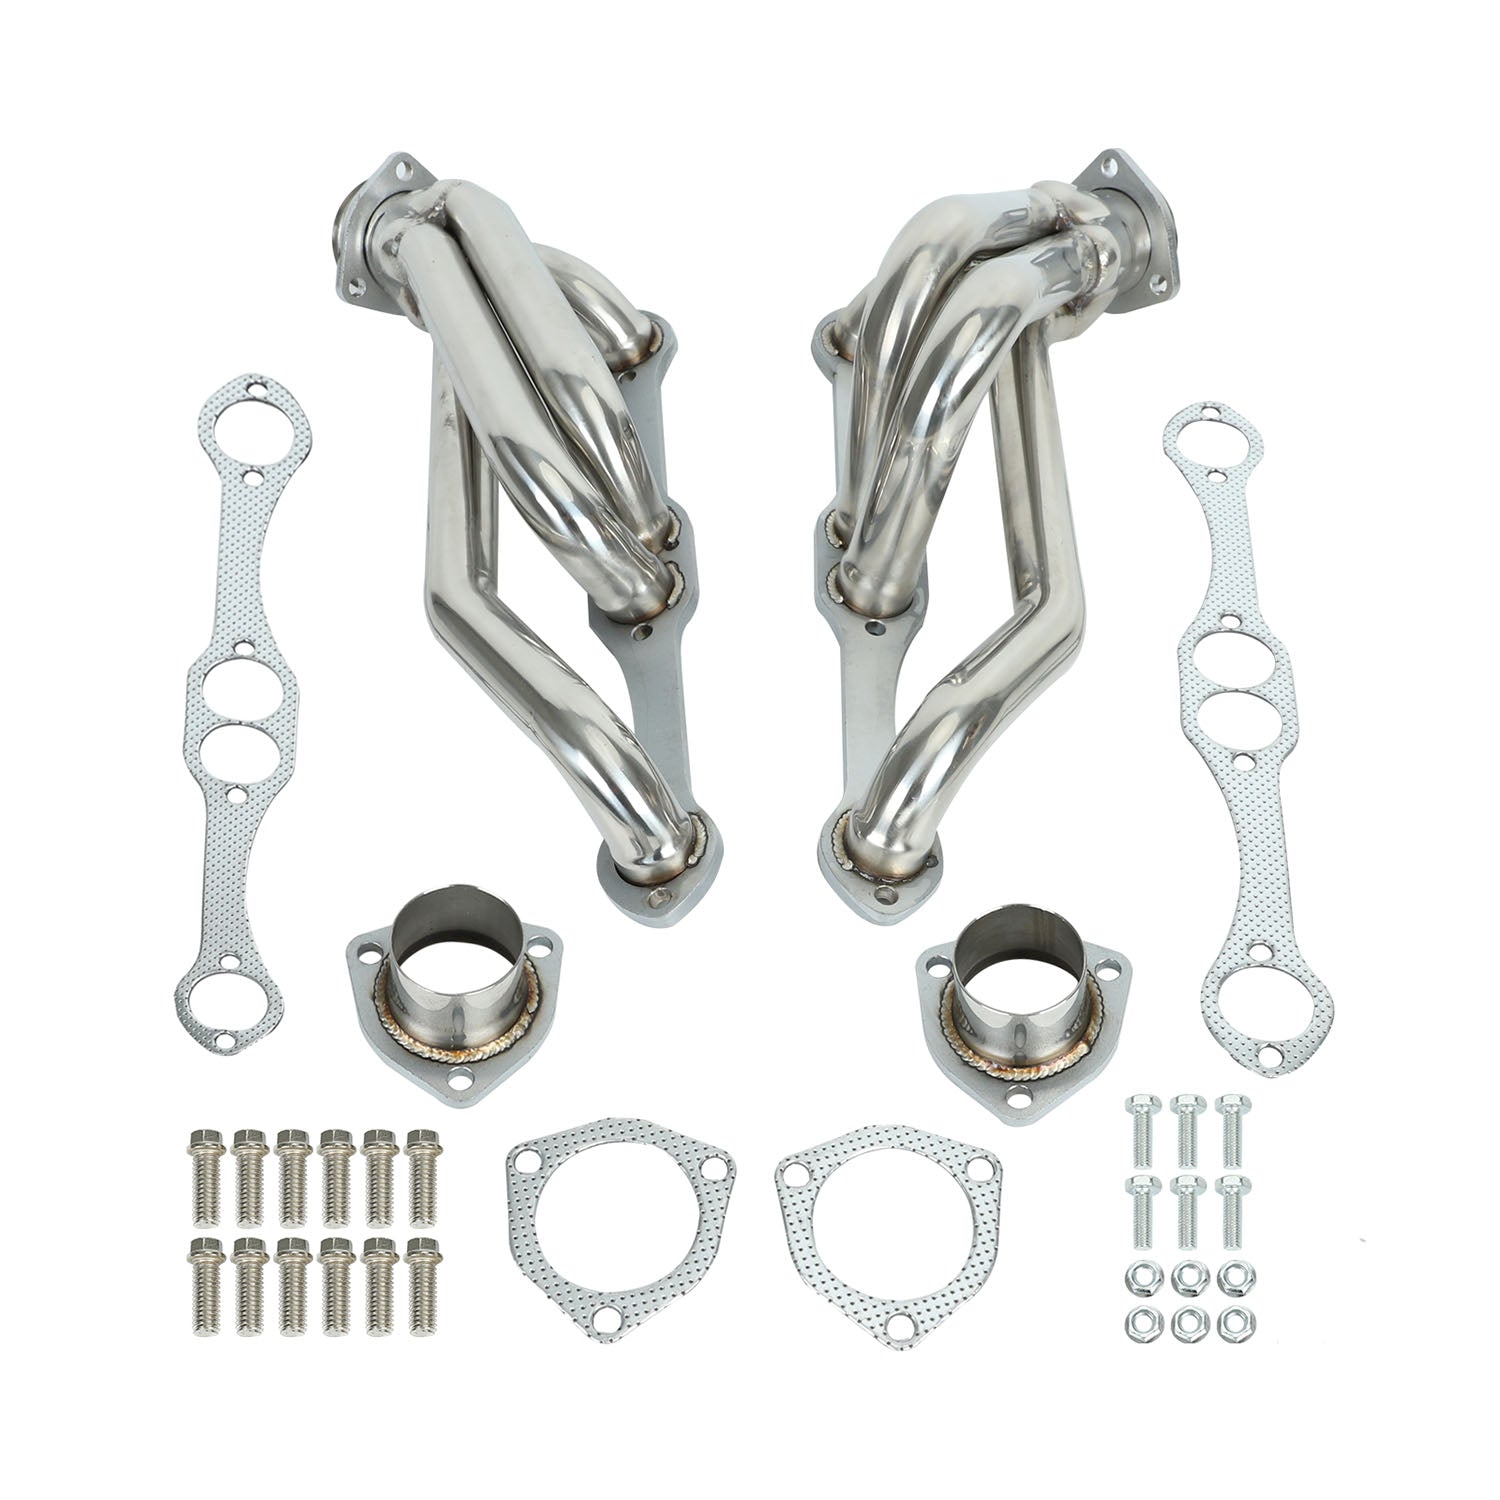 Exhaust Manifold Header for Chevy Small Block Blazer S10 S15 2WD 283, 302, 305, 307, 327, 350, 400